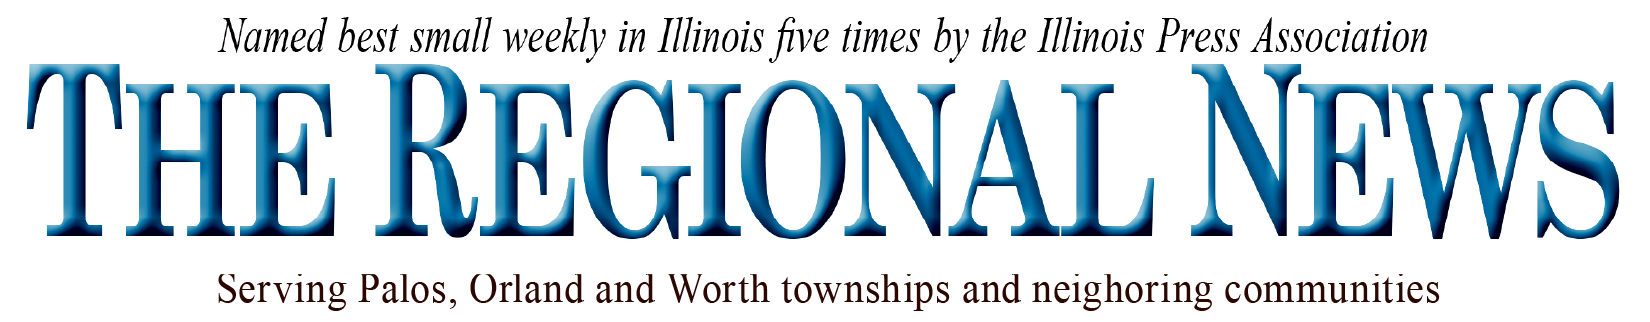 the-regional-news-logo.png